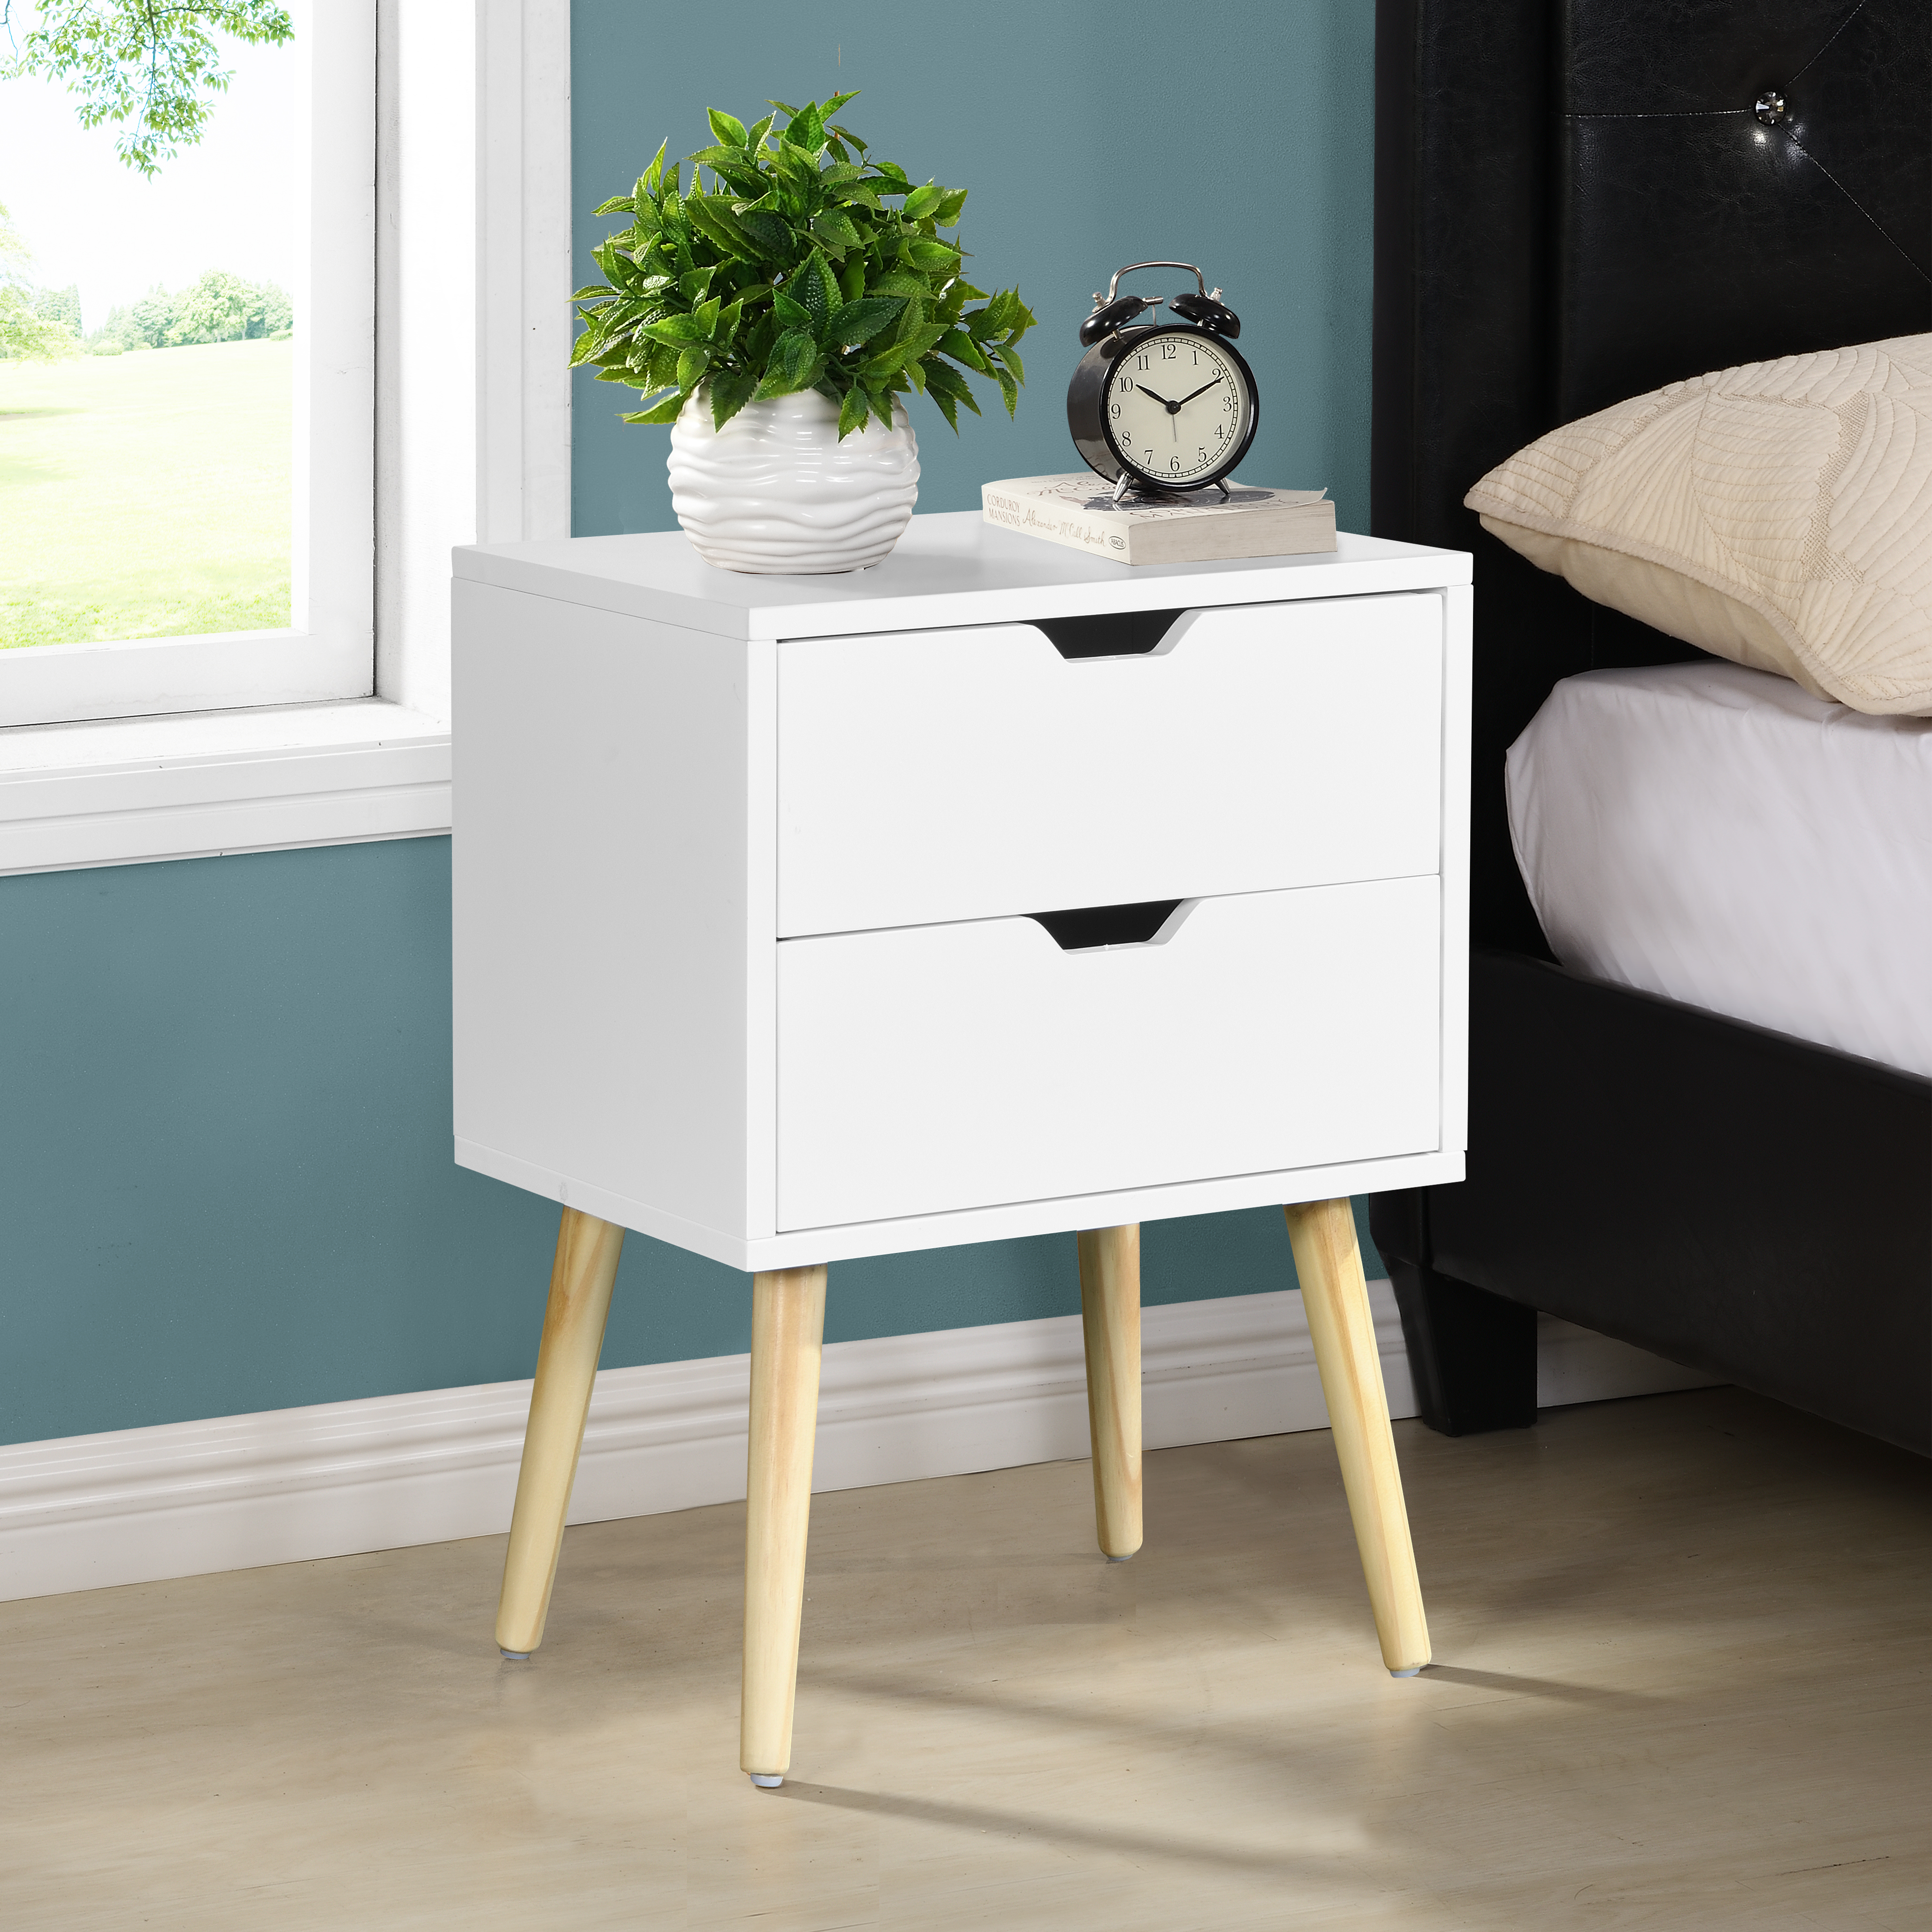 Side Table with 2 Drawer and Rubber Wood Legs, Mid-Century Modern Storage Cabinet for Bedroom Living Room Furniture, White-CASAINC